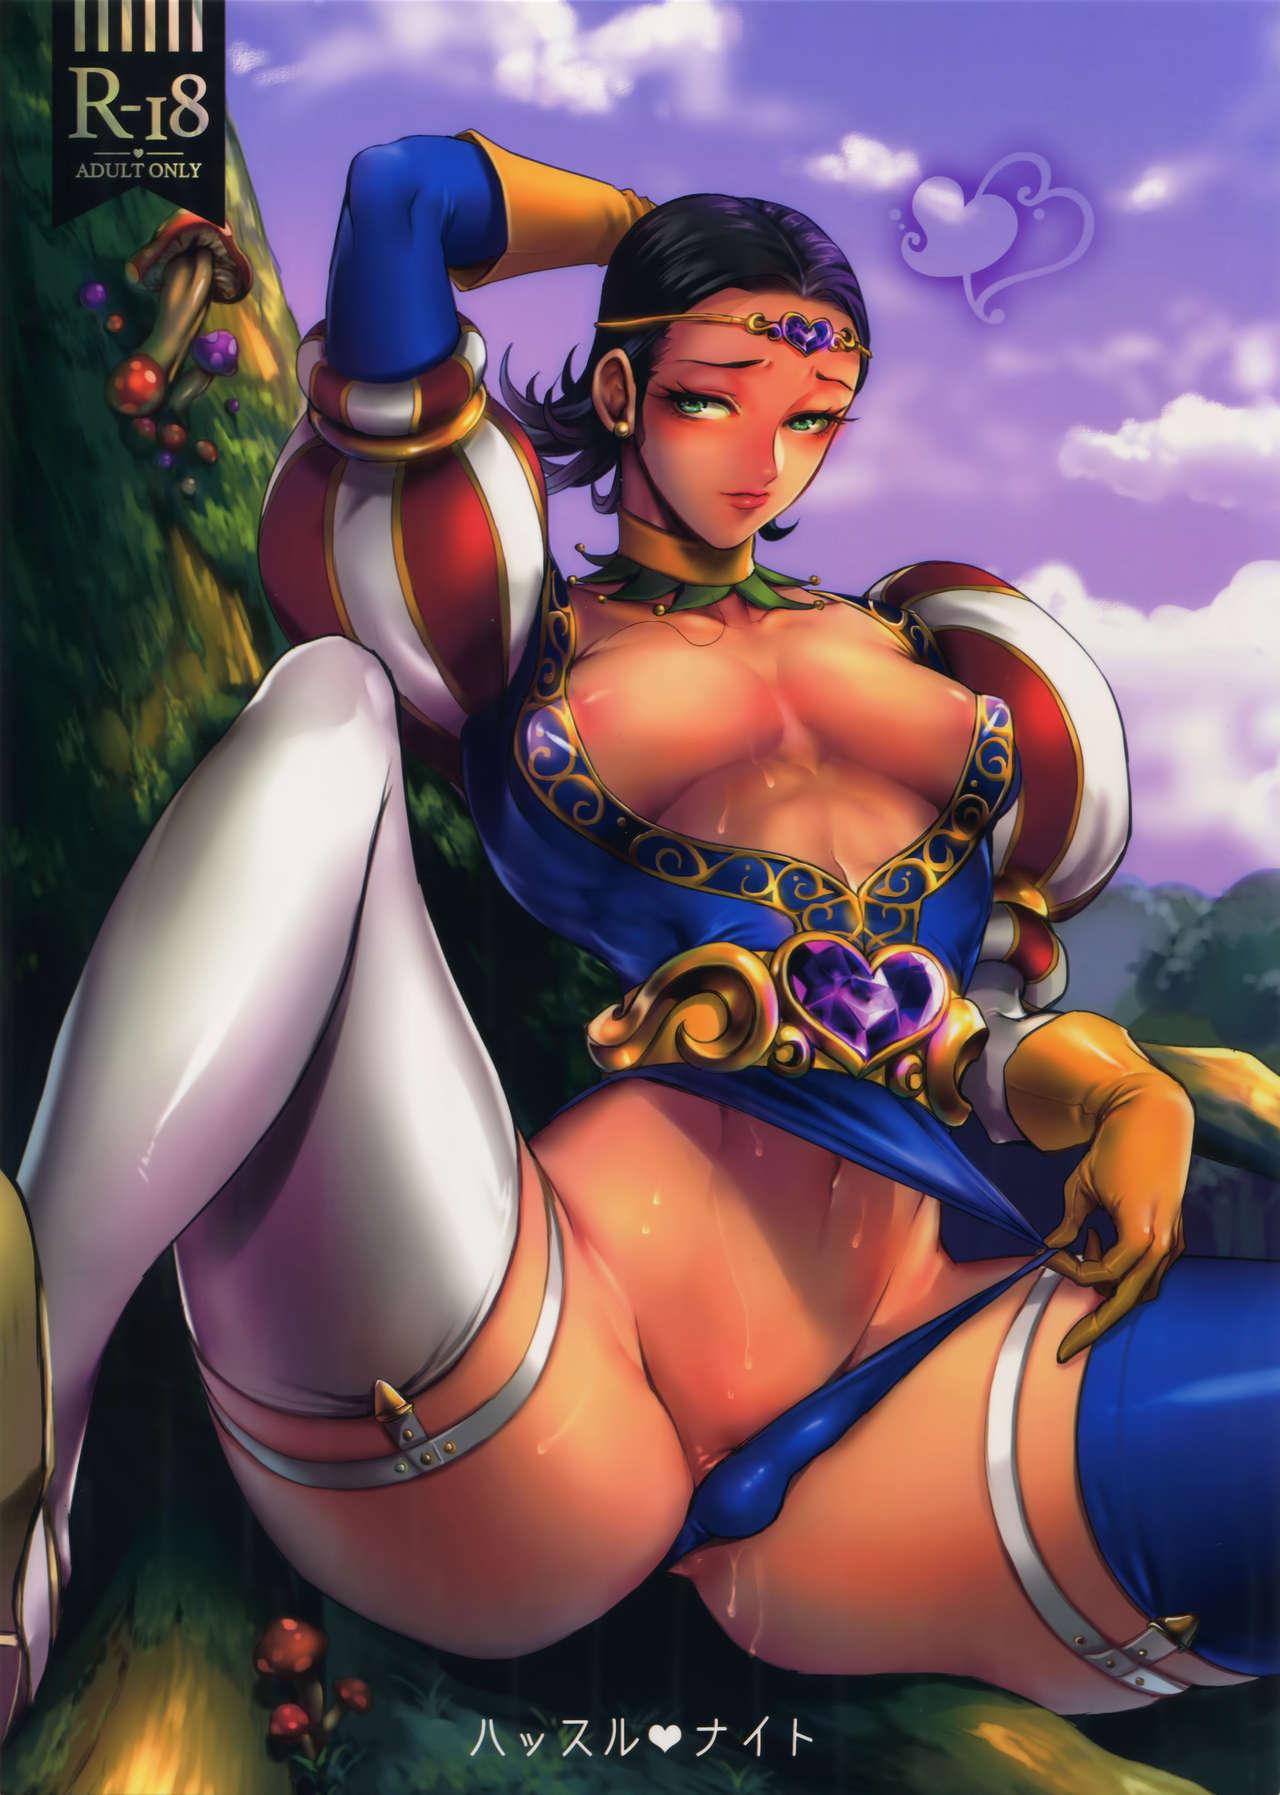 Shemale Porn Hustle Night | 喧囂之夜 - Dragon quest xi Naked Sex - Page 2